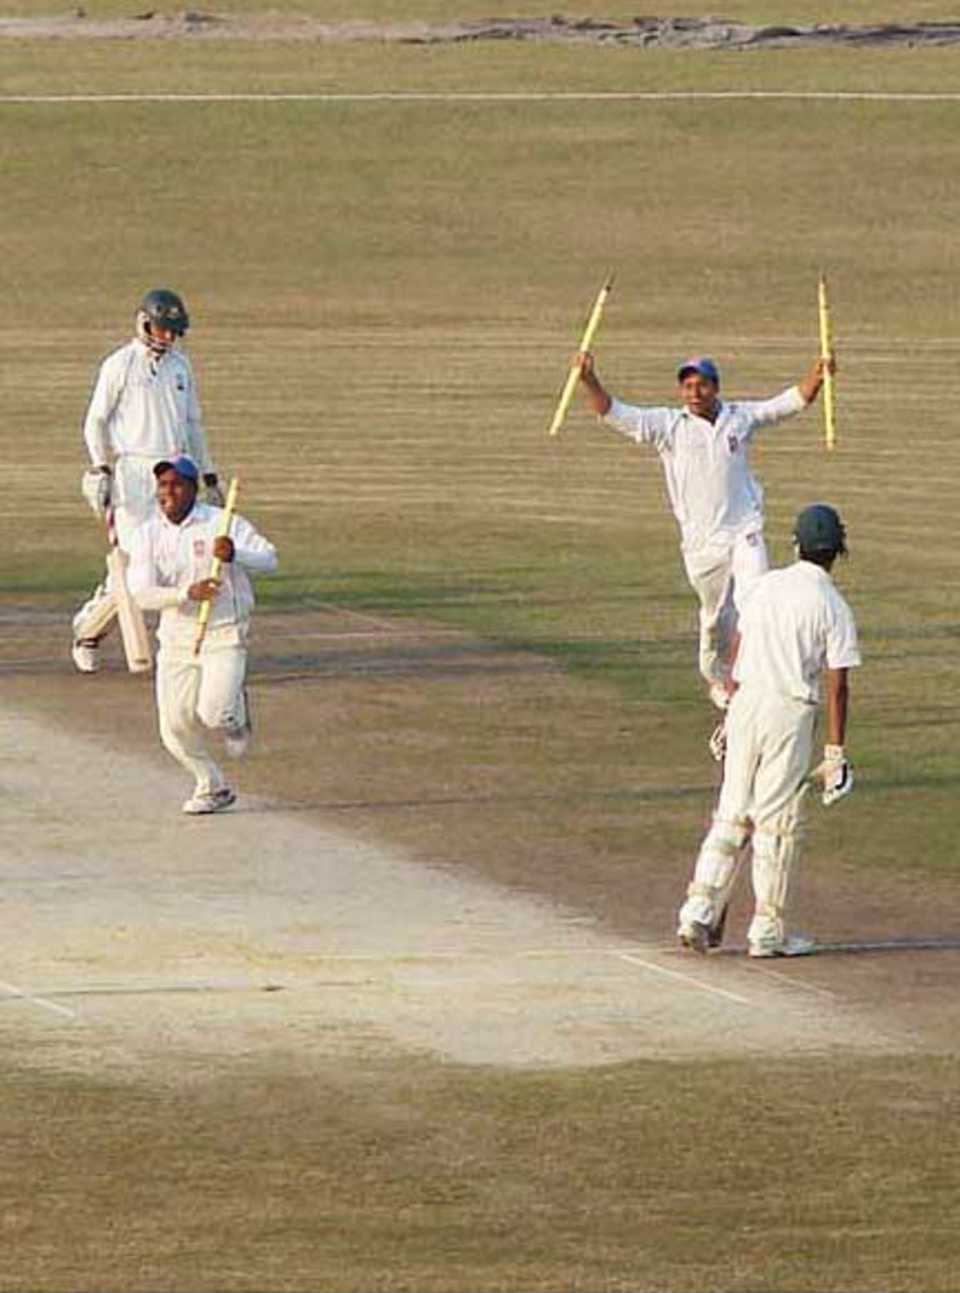 Khulna players celebrate after taking the last Barisal wicket